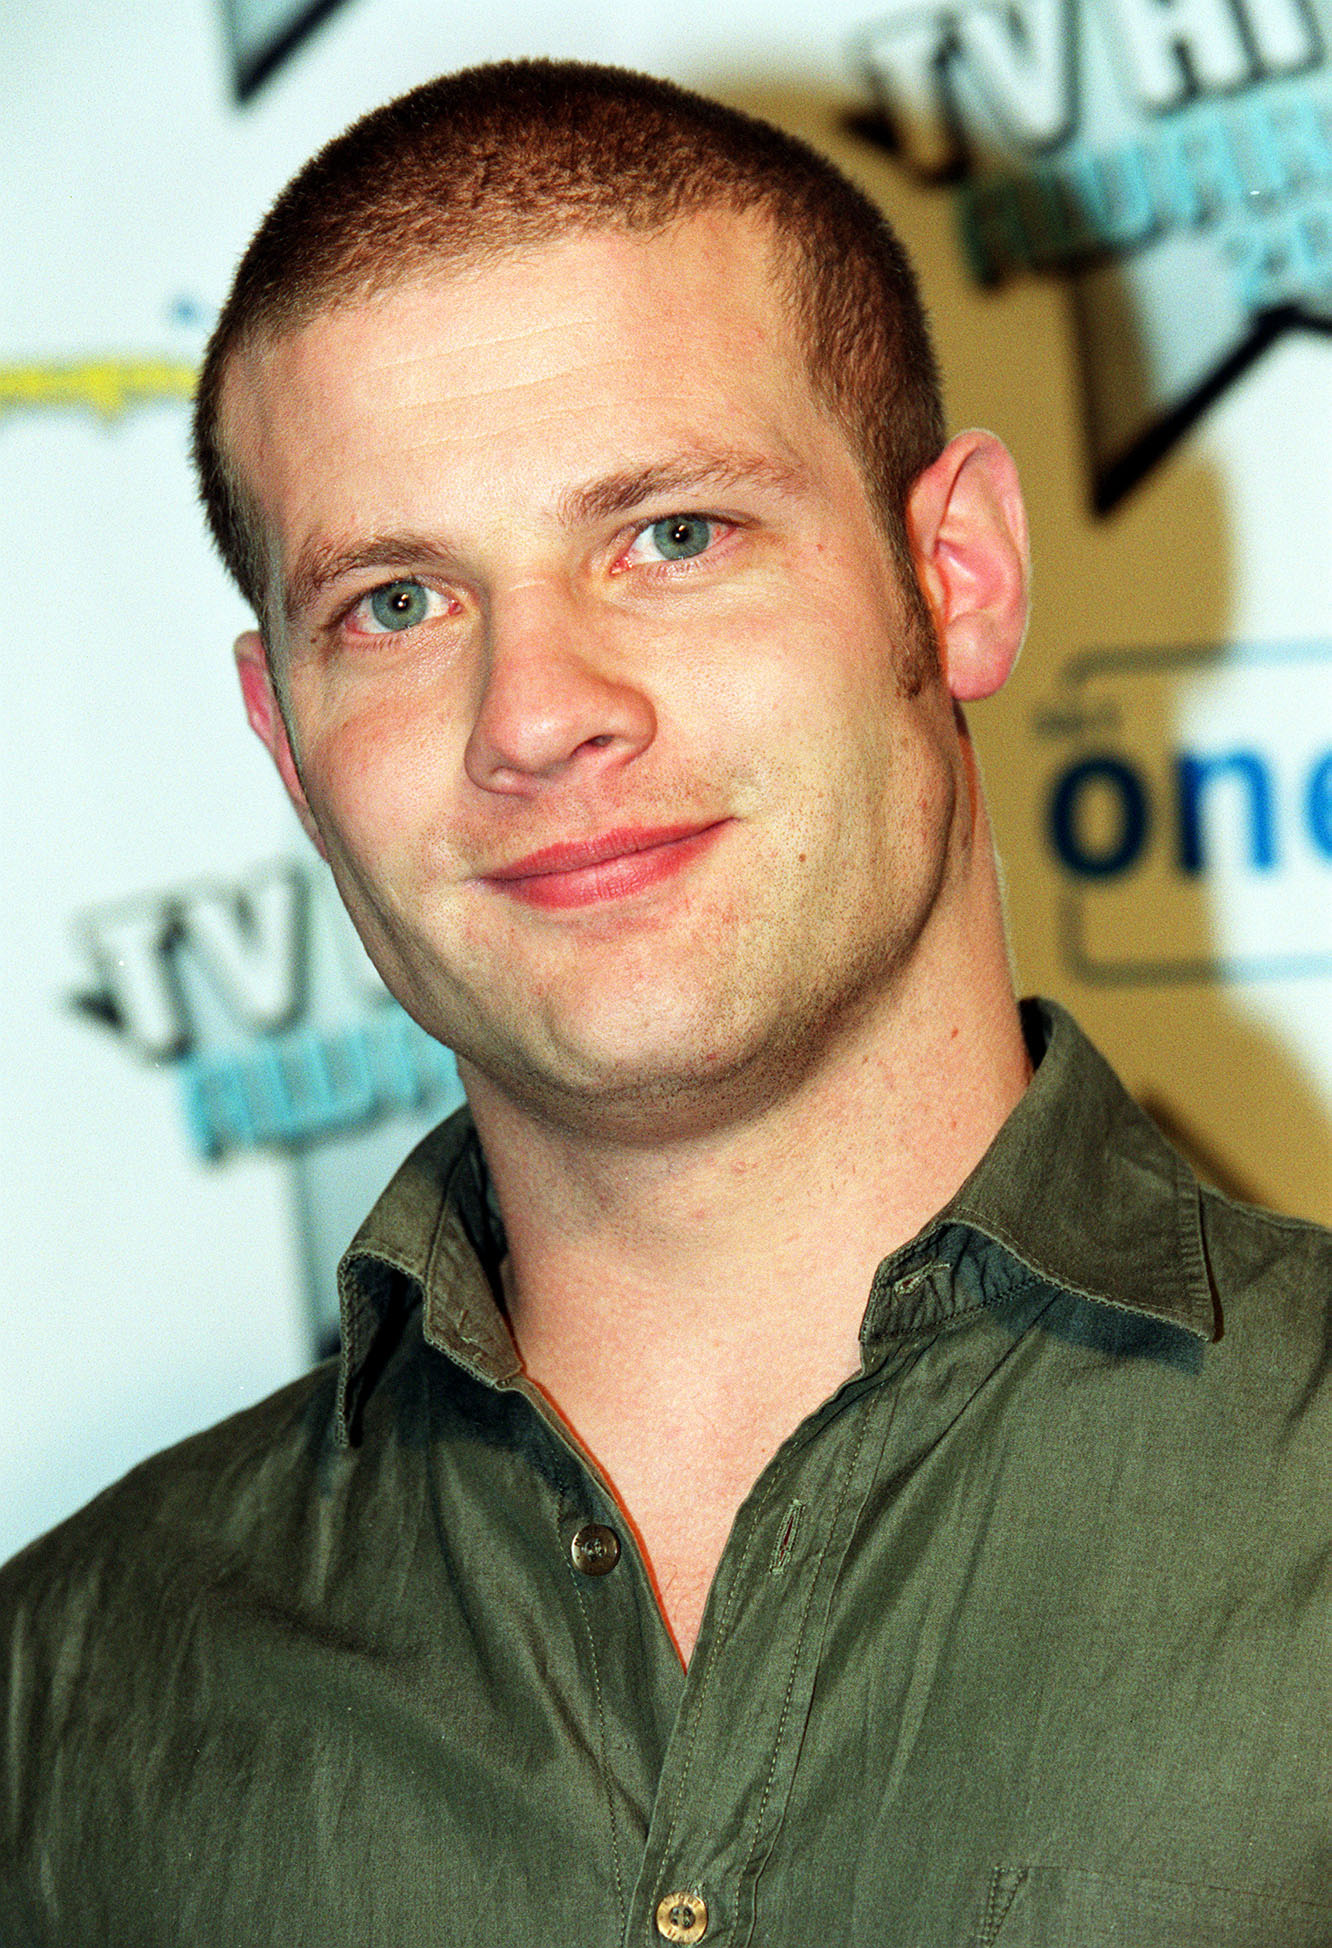 Dermot O'Leary le 29 octobre 2000 | Source : Getty Images